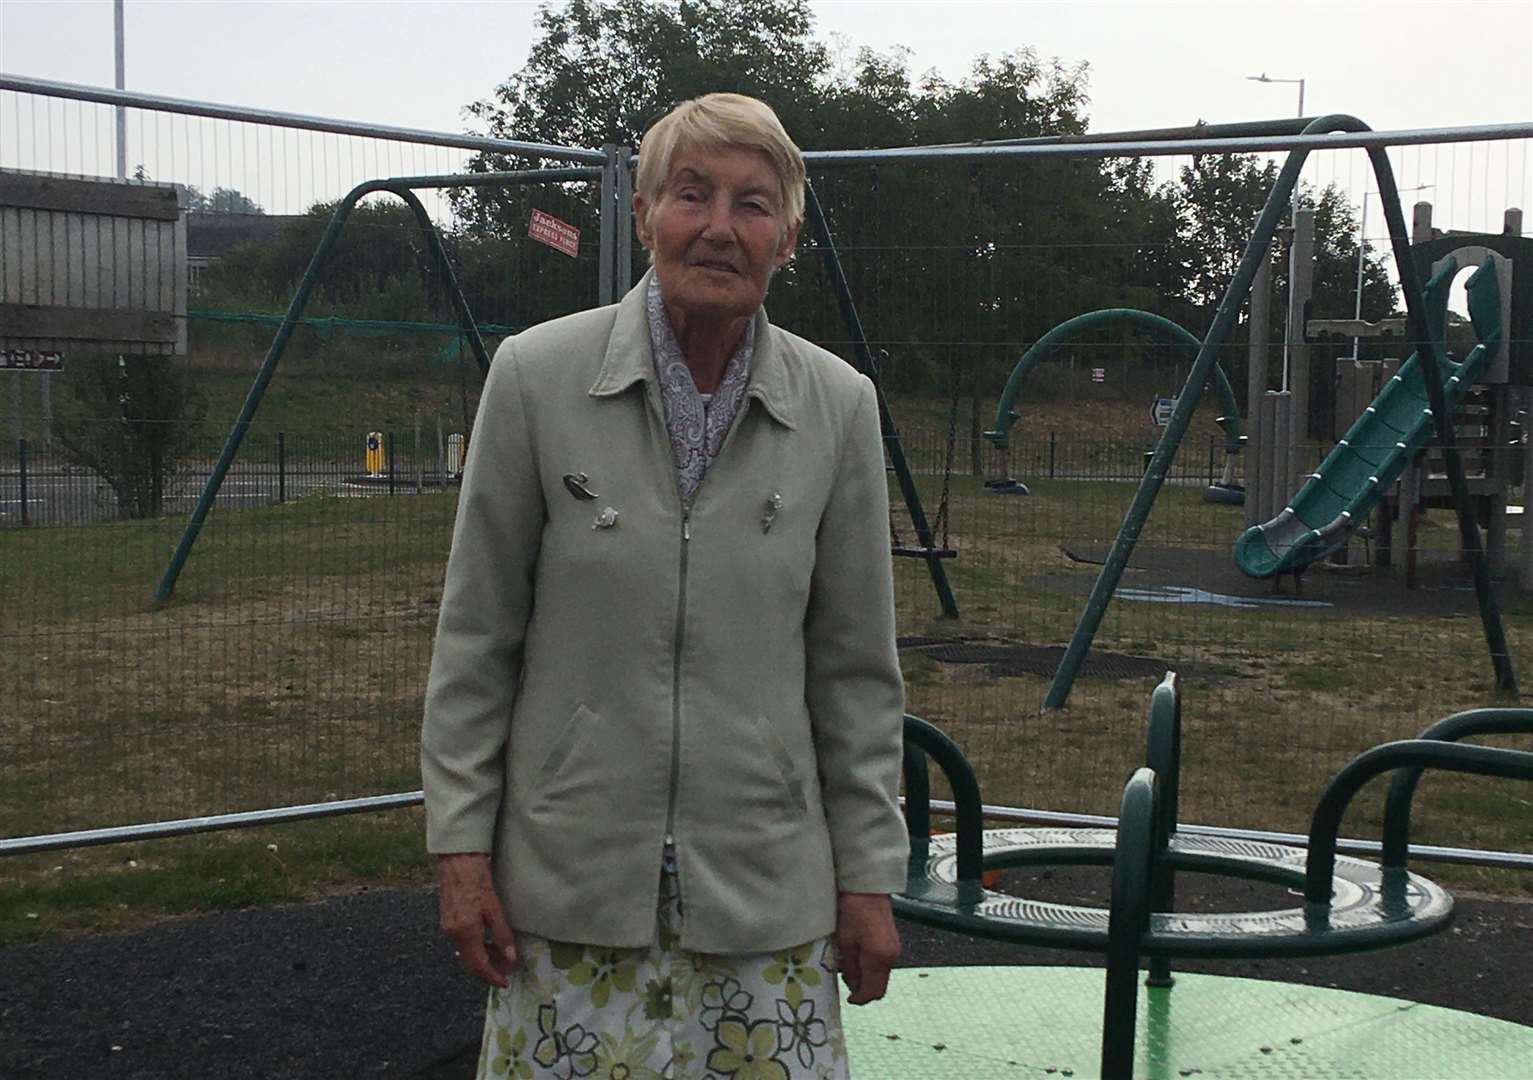 Mrs Plumley says: "Children want a play park but constantly destroy it."